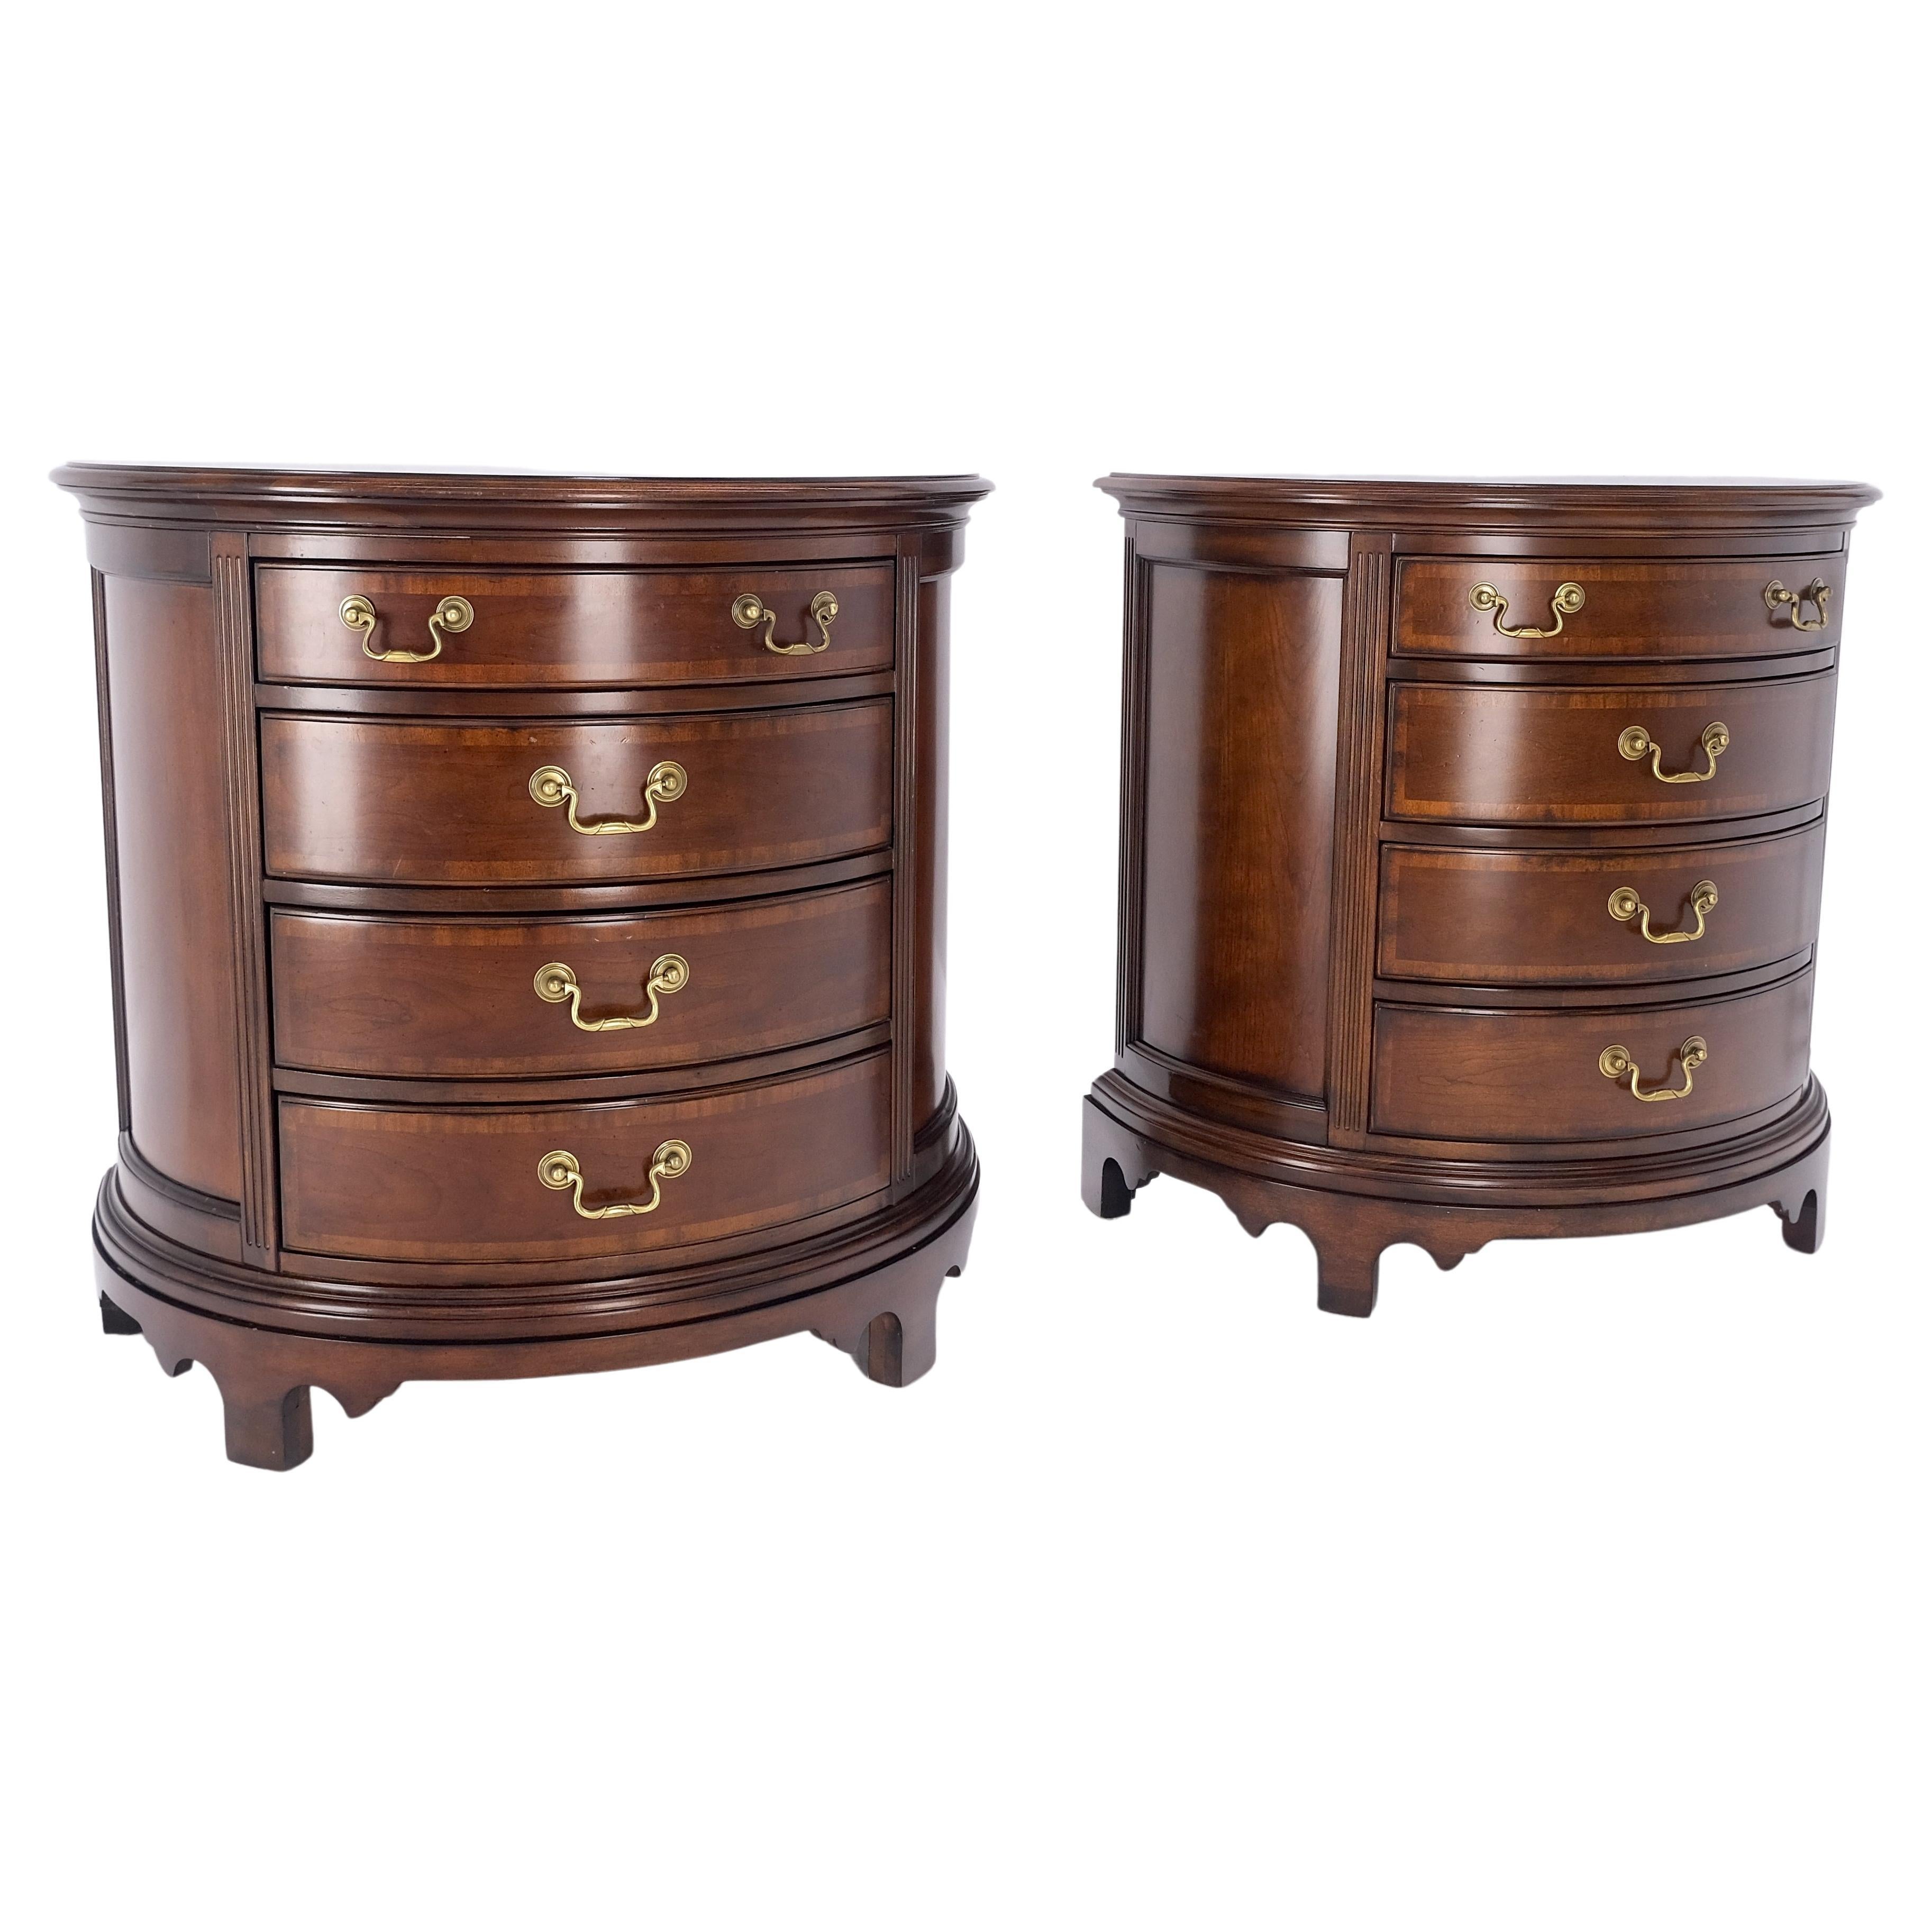 Pair of 4 Drawer Banded Top Demi Lune Consoles Dressers Brass Drop Pulls MINT! For Sale